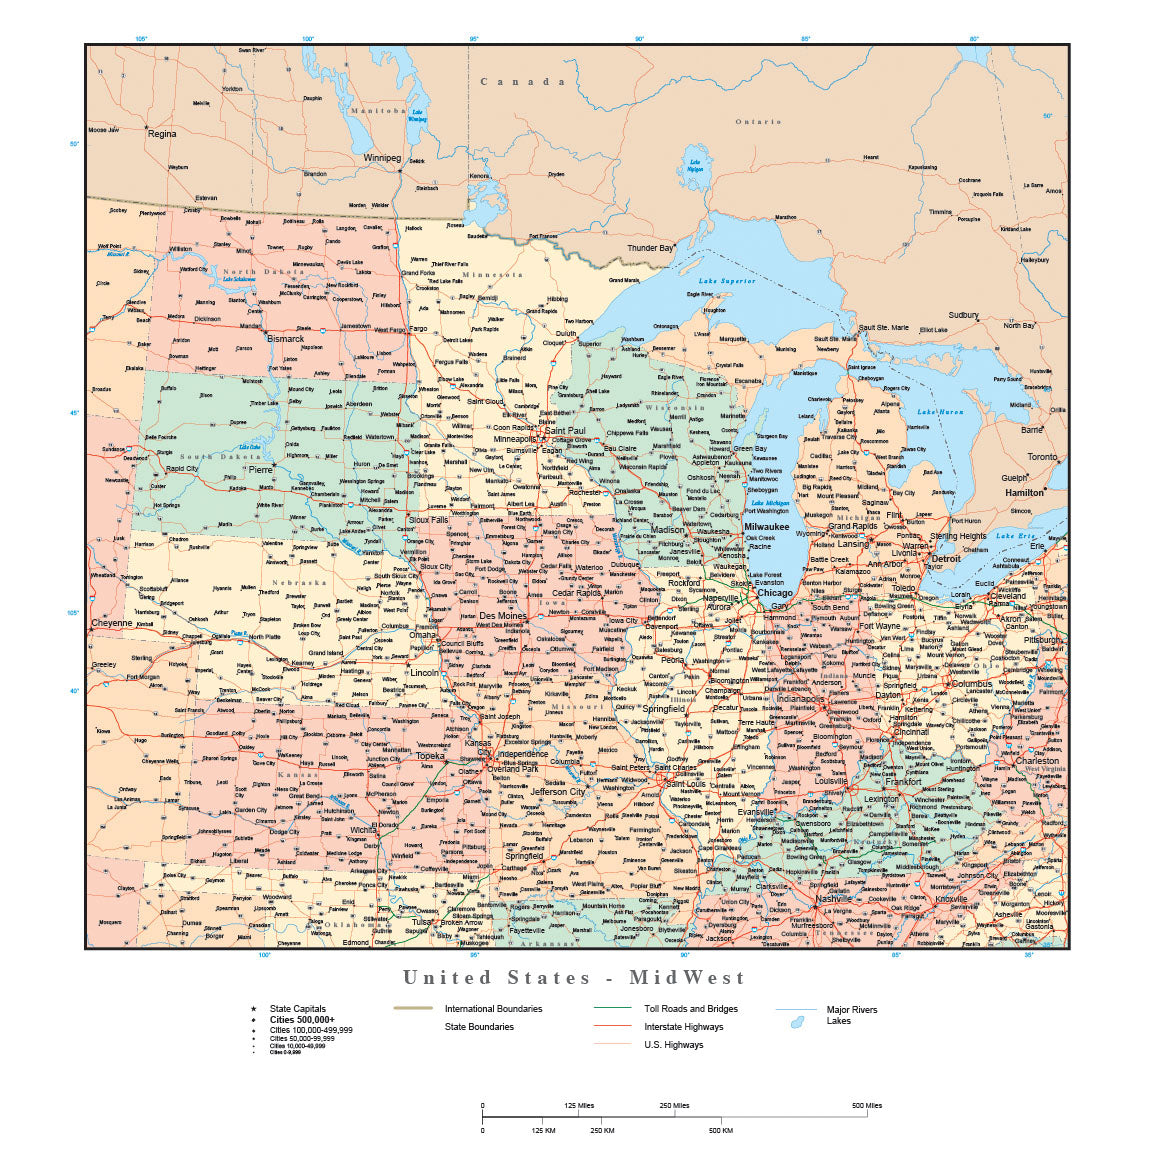 usa-midwest-region-map-with-states-highways-and-cities